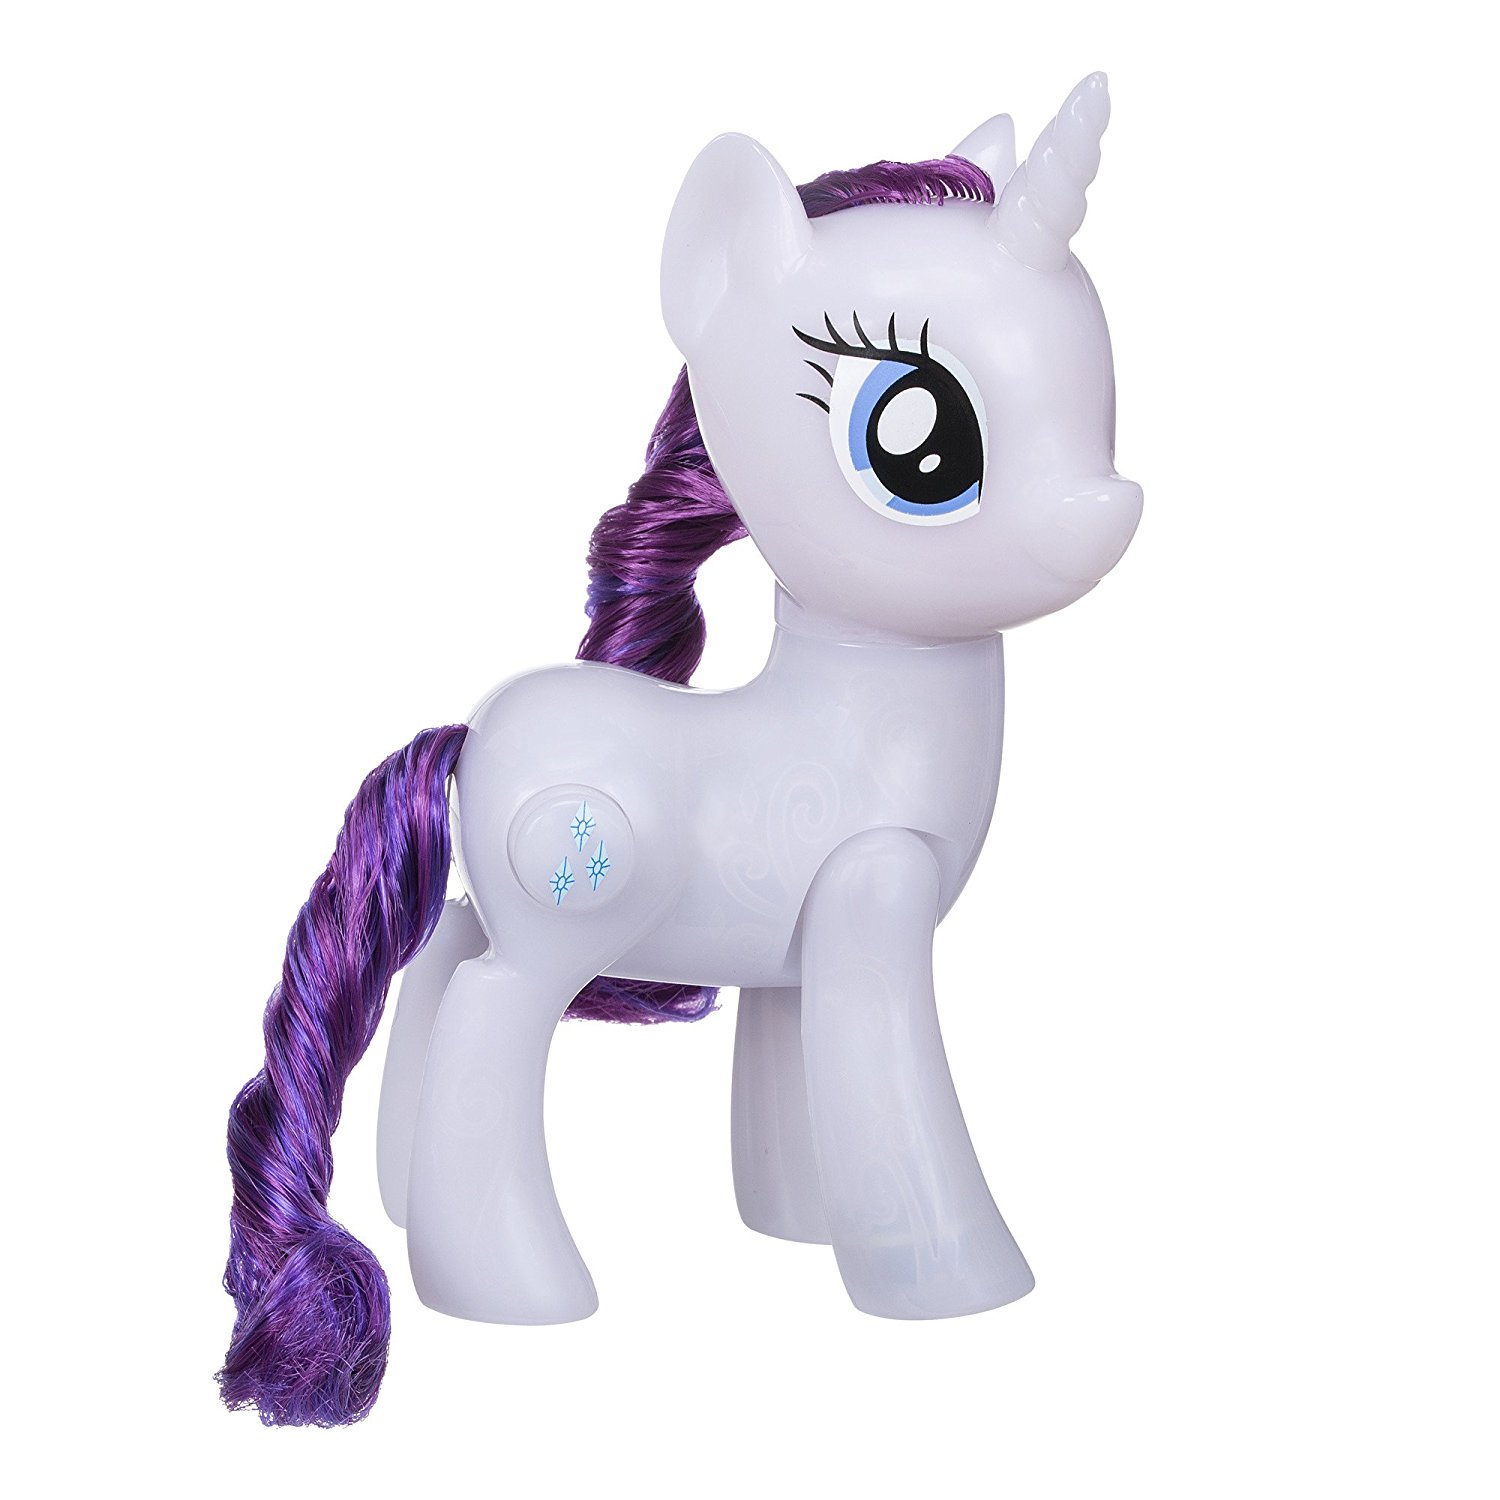 New "My Little Pony: The Movie" Shining Friends Rarity Figure available